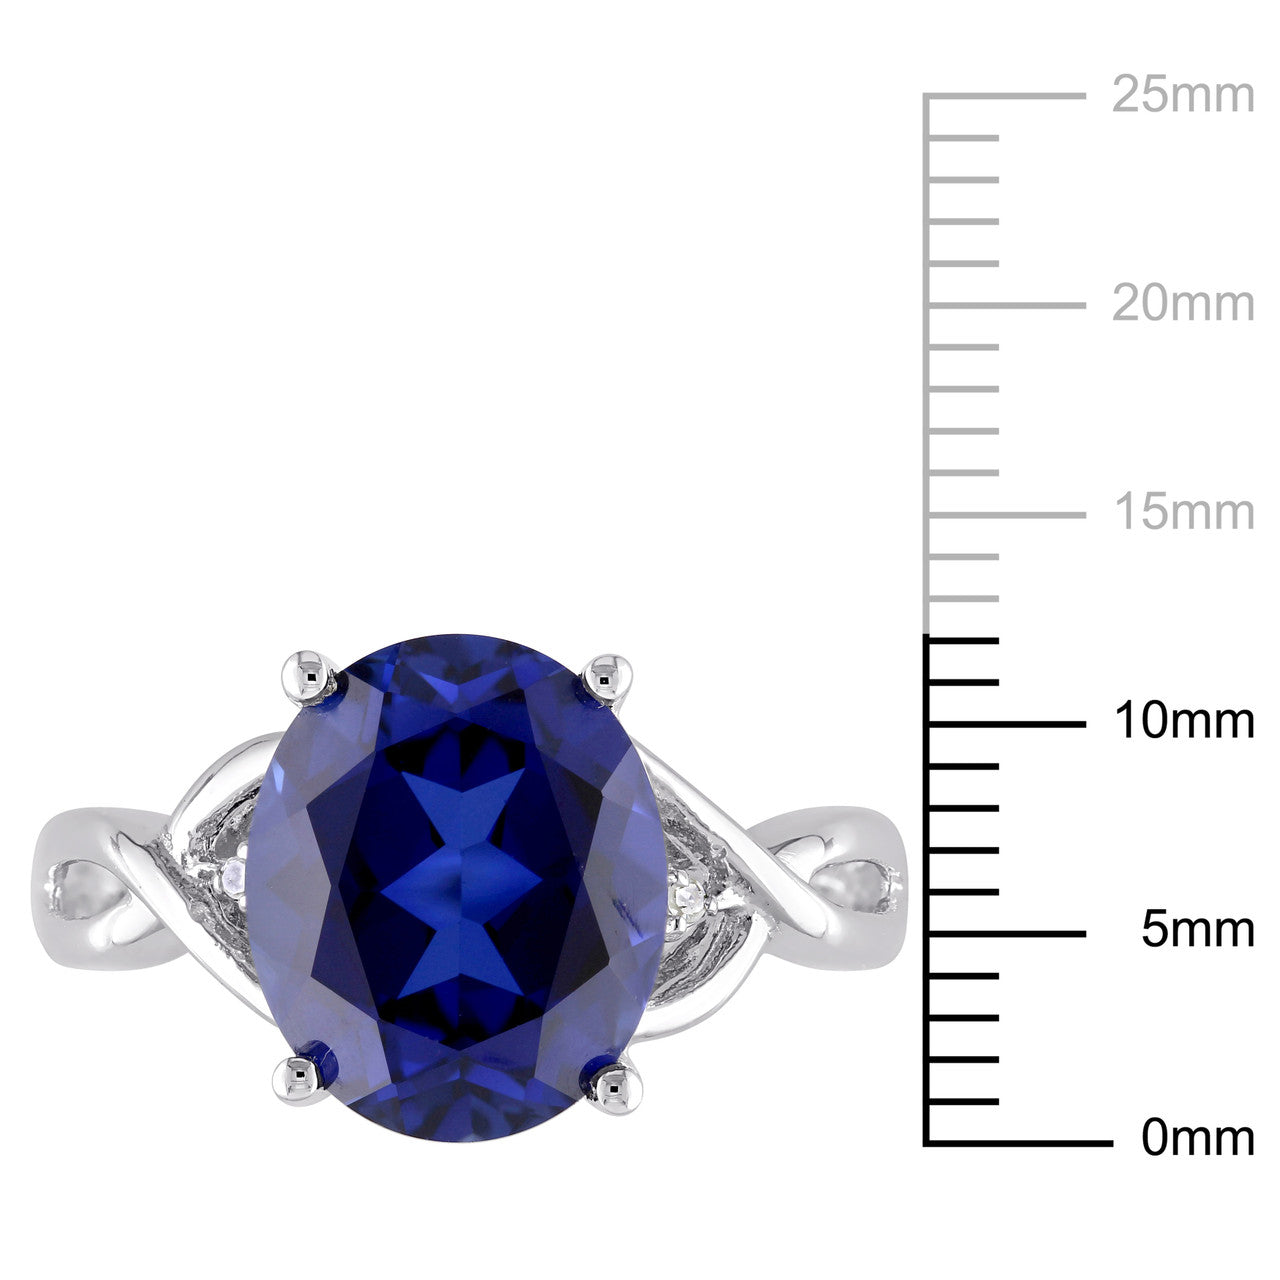 Ice Jewellery 7 1/2 Carat Oval Created Sapphire & Diamond Cocktail Ring in Sterling Silver - 7500081123 | Ice Jewellery Australia